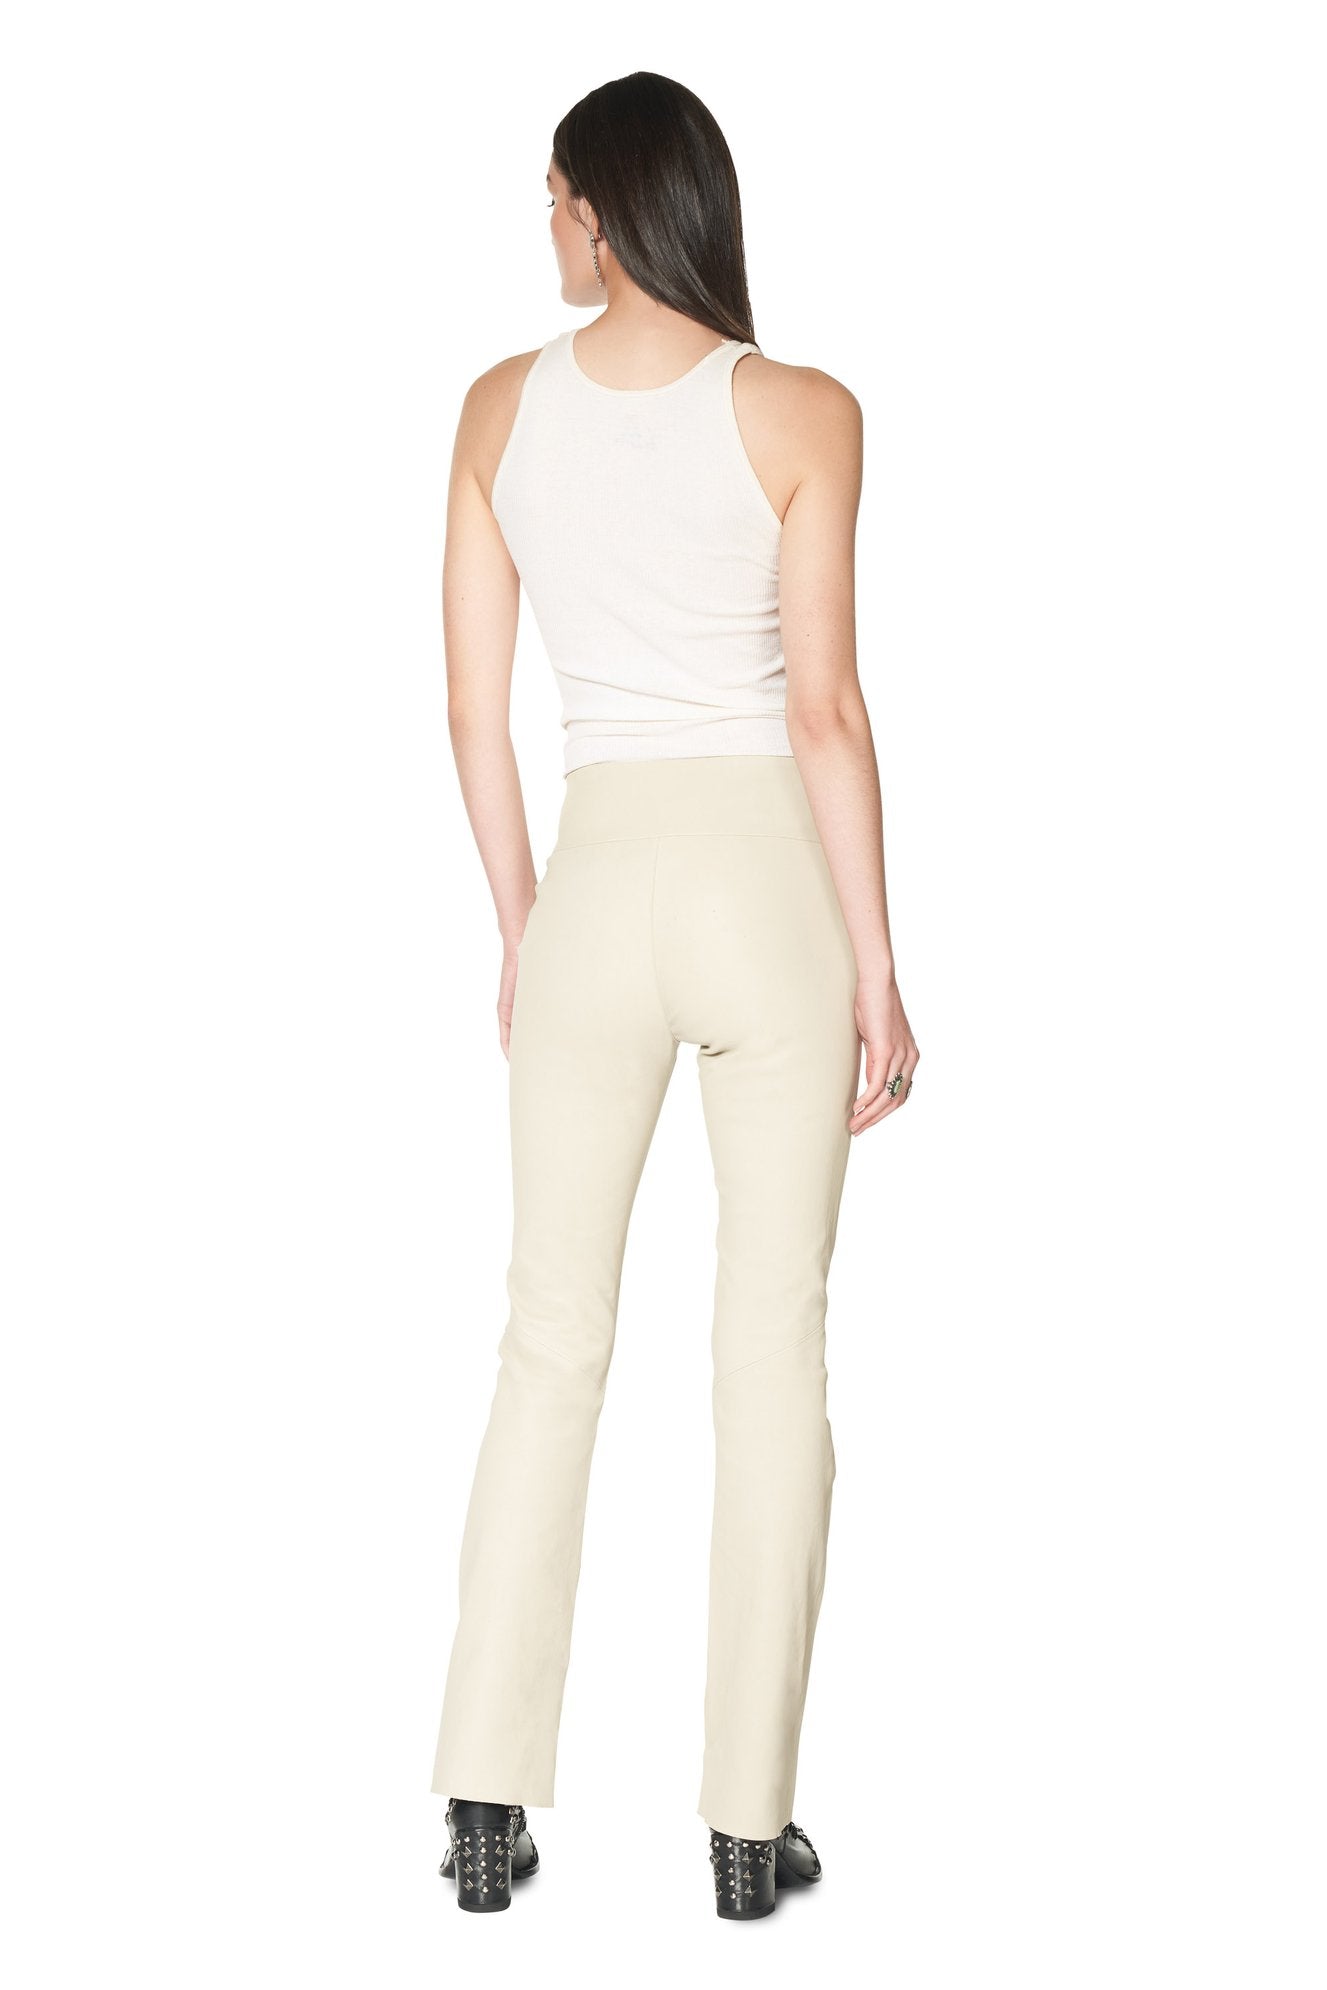 DDR Leather Bandit Pant P491 in string/white flare leg at 6Whiskey six whisky Maria Spring 2021